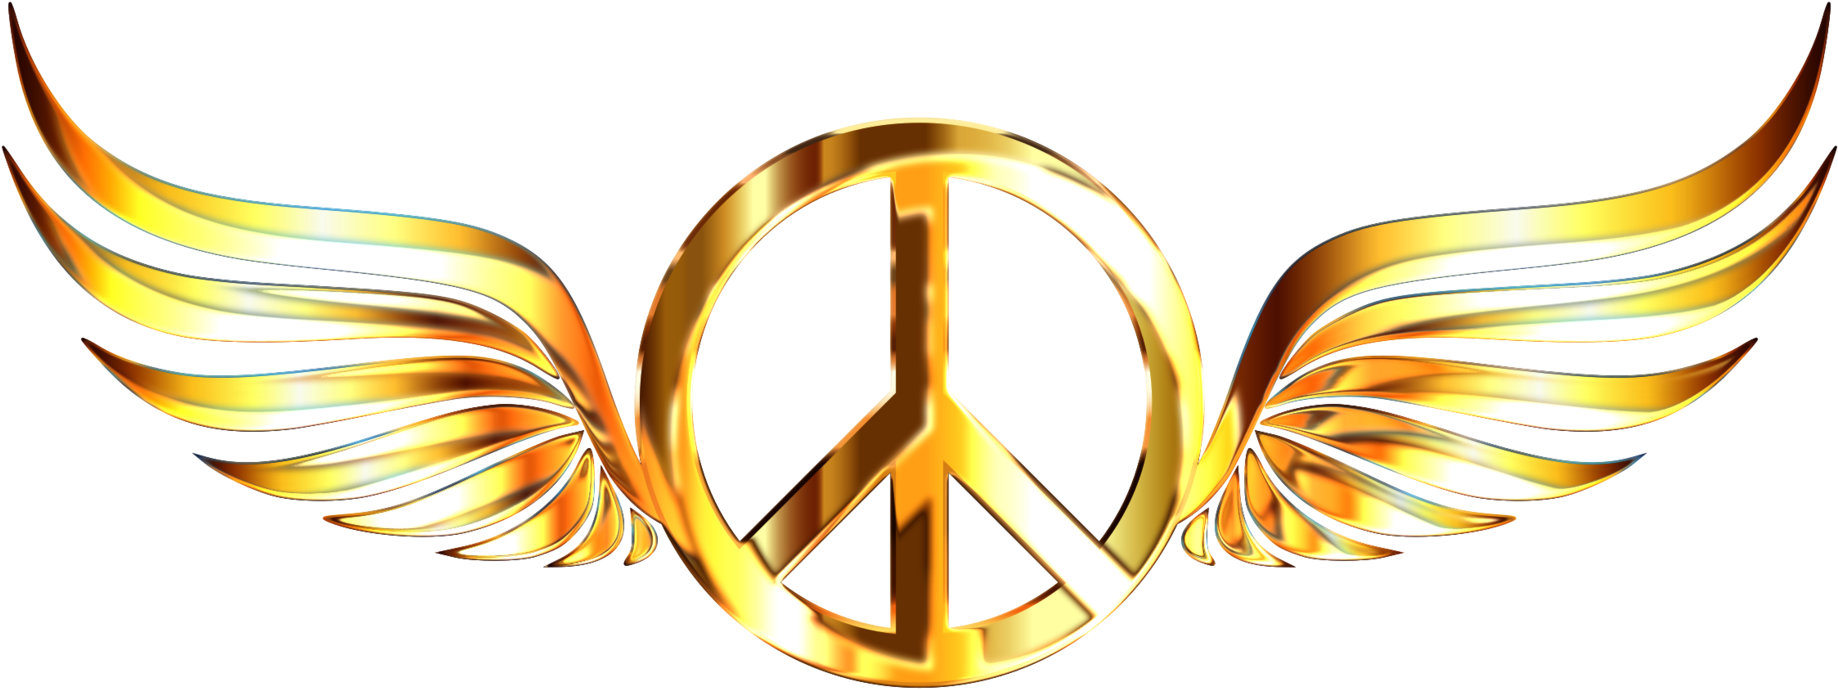 A Gold Peace Sign With Wings